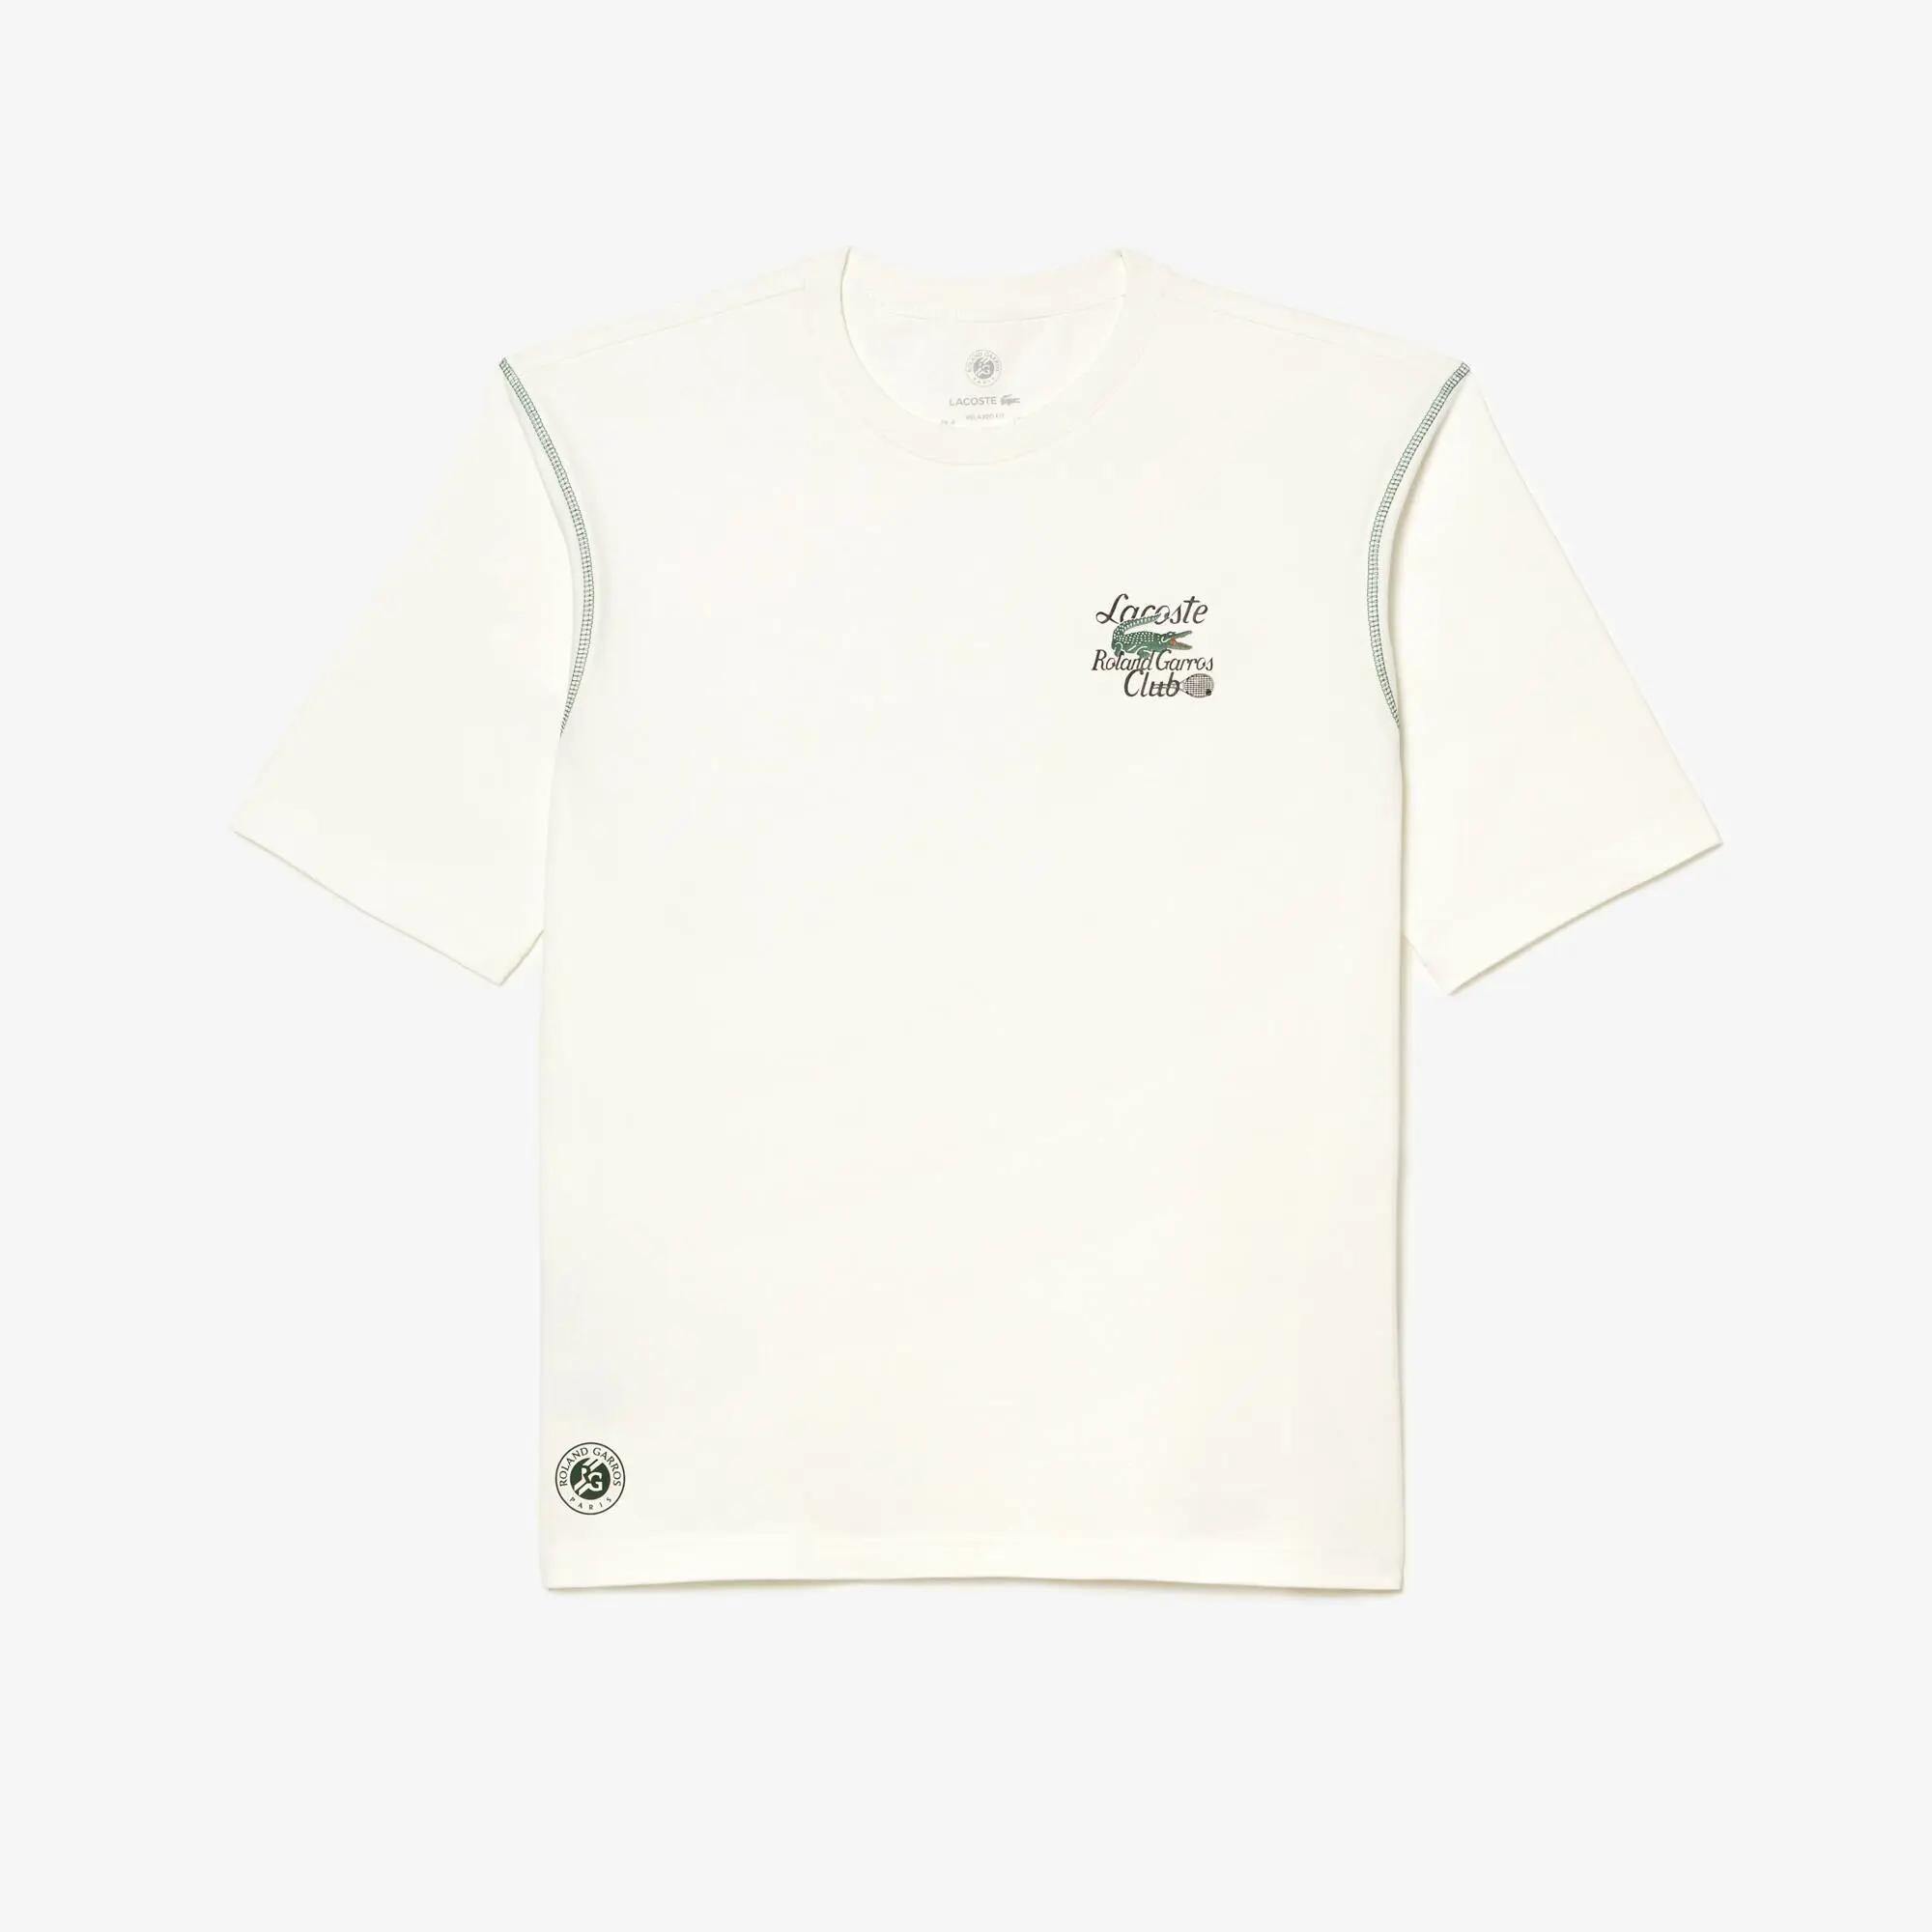 Lacoste Men’s Lacoste Sport Roland Garros Edition Chunky Jersey T-Shirt. 2